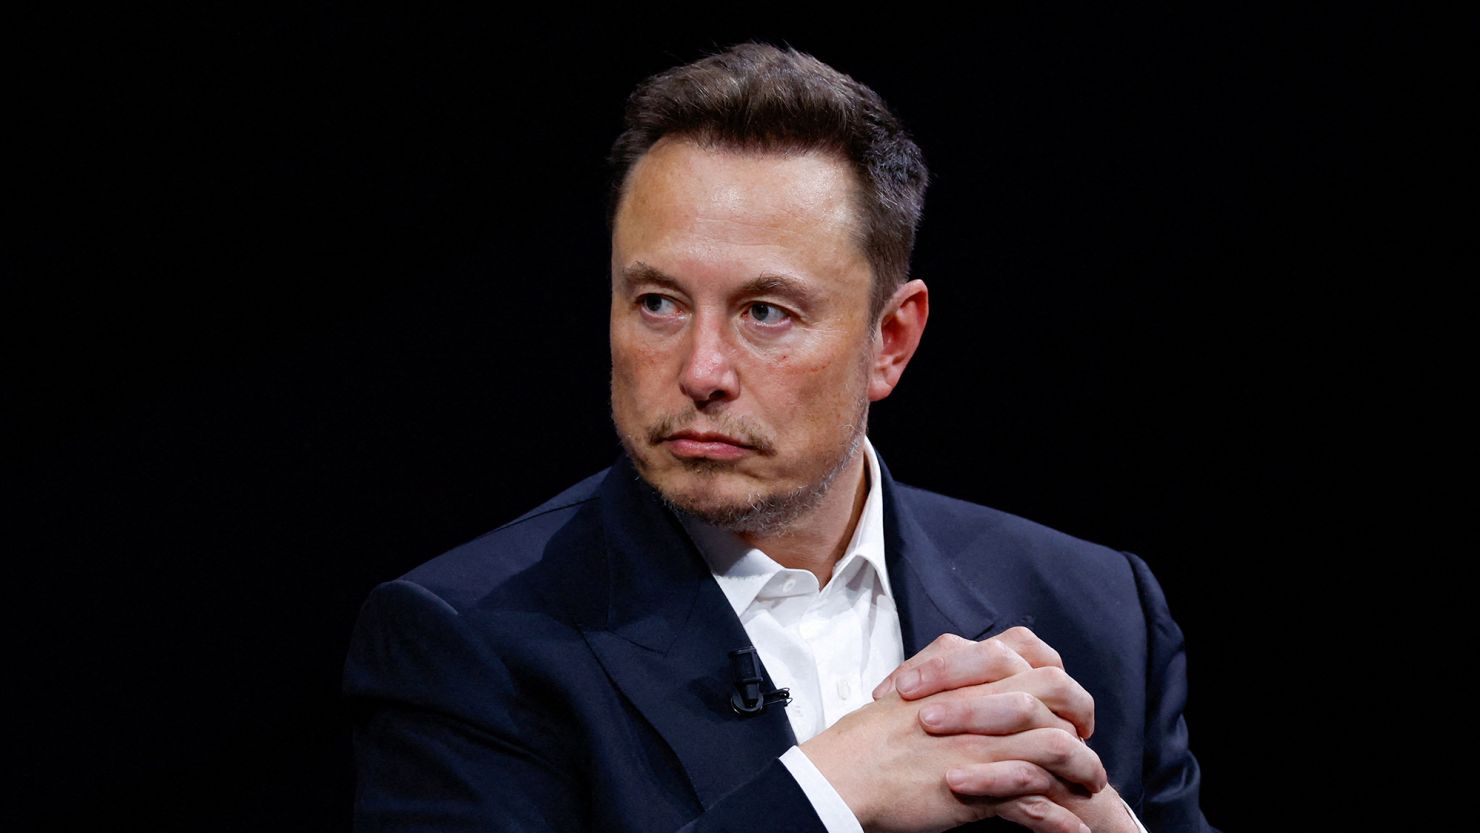 Elon Musk, Chief Executive Officer of SpaceX and Tesla and owner of X.